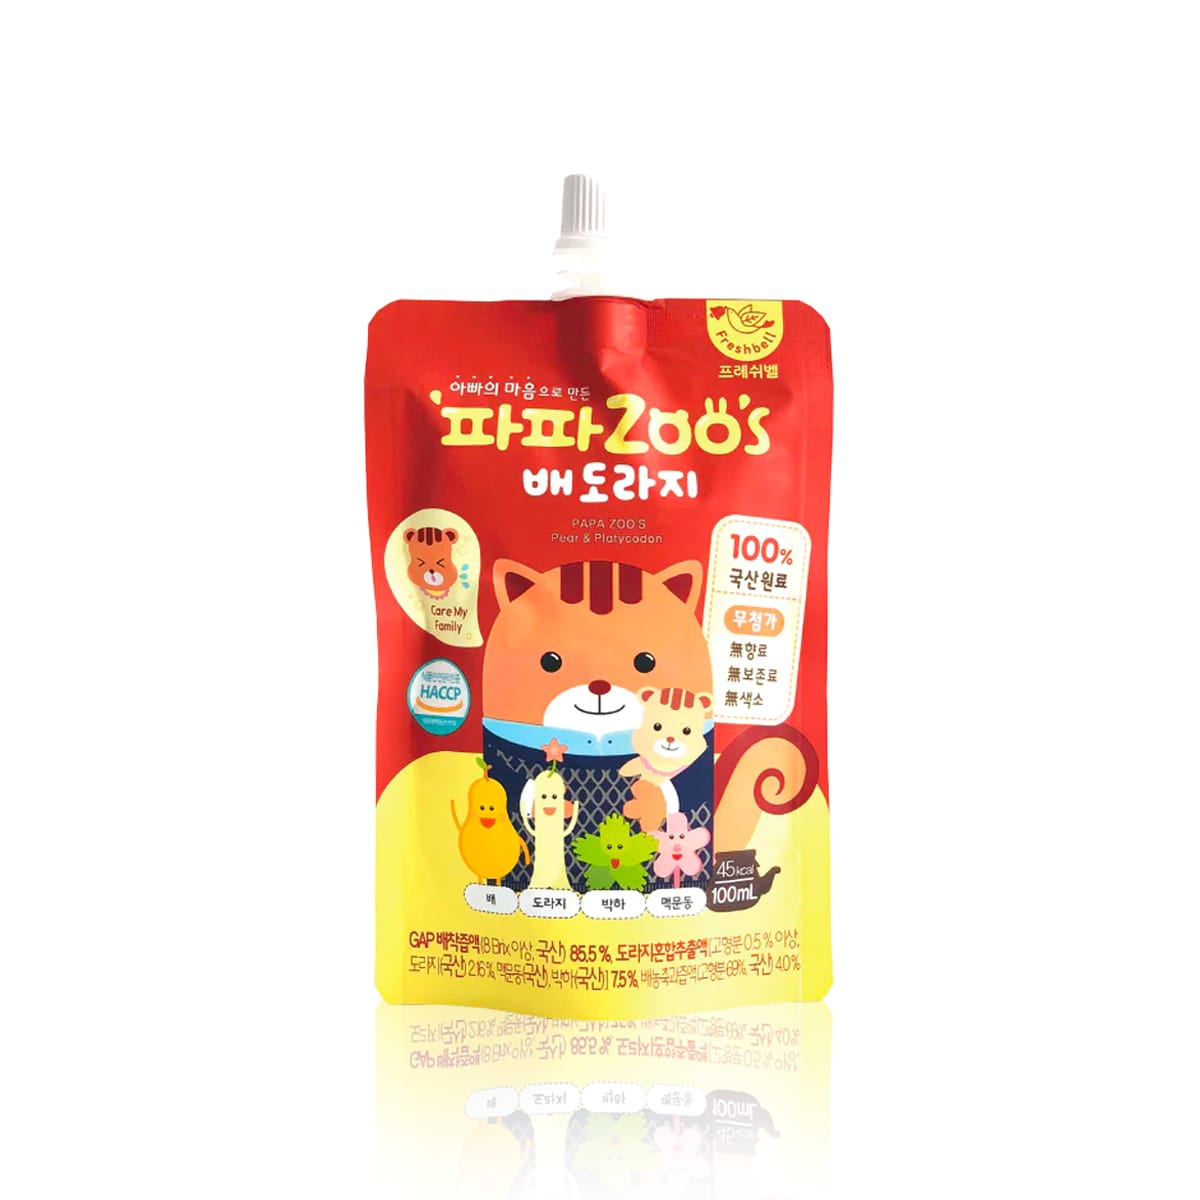 Freshbell Papazoo's Juice (For Cough/Cold) 9M+